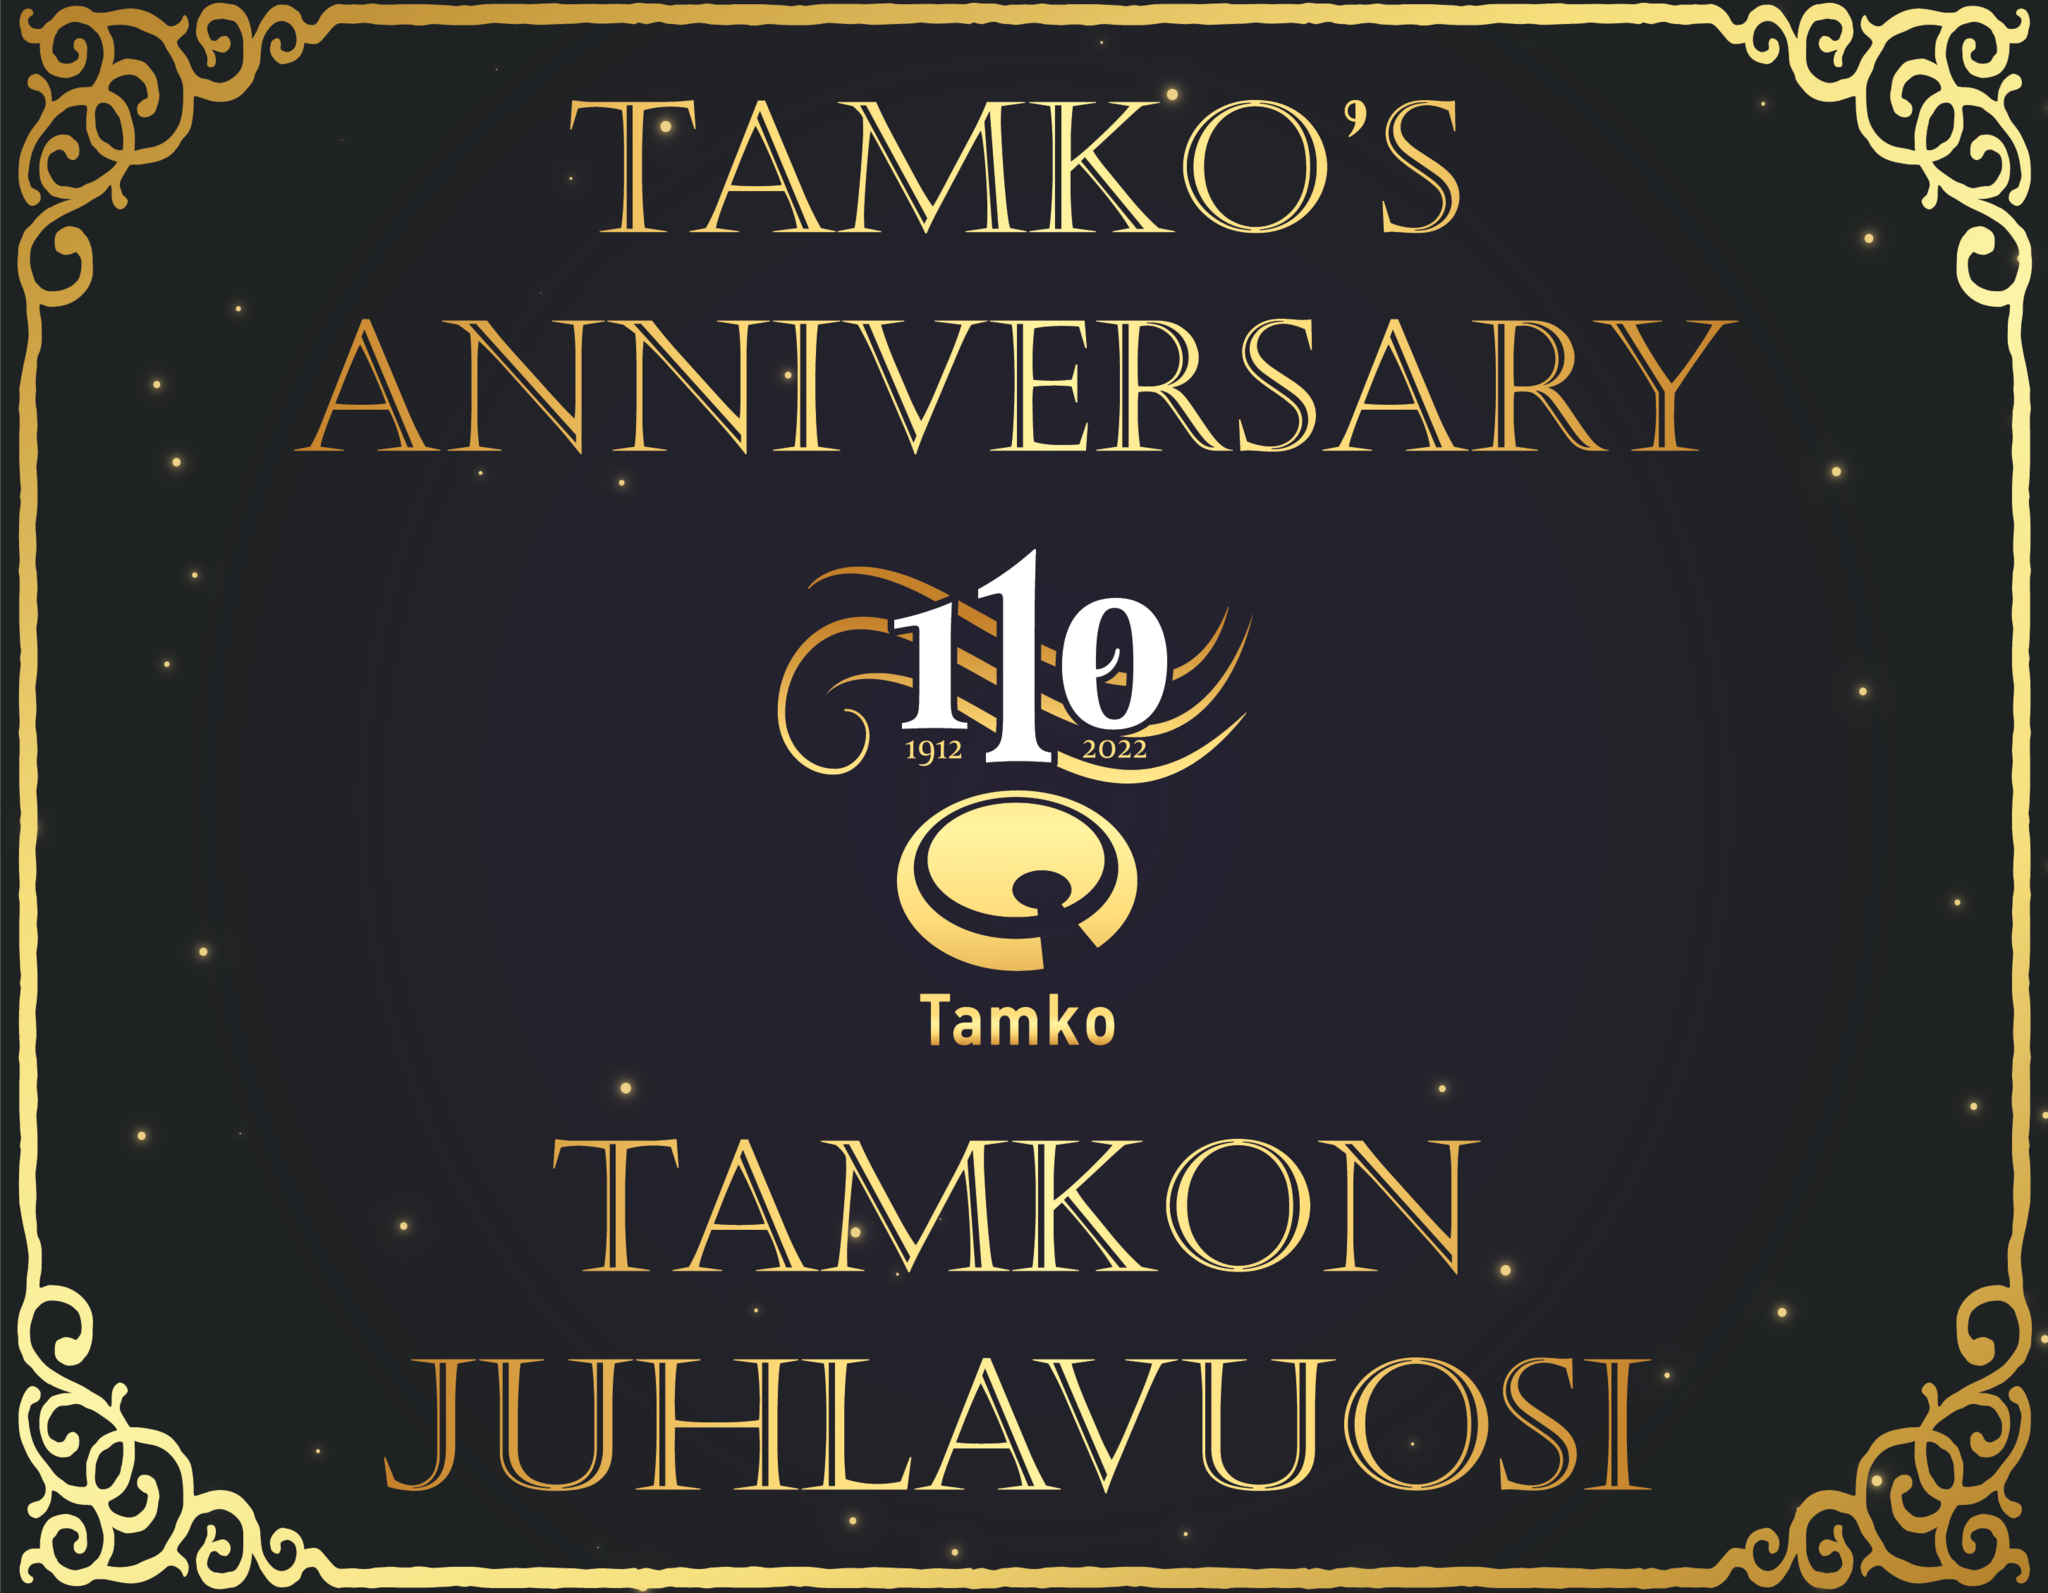 Tamko is unique and meaningful workplace